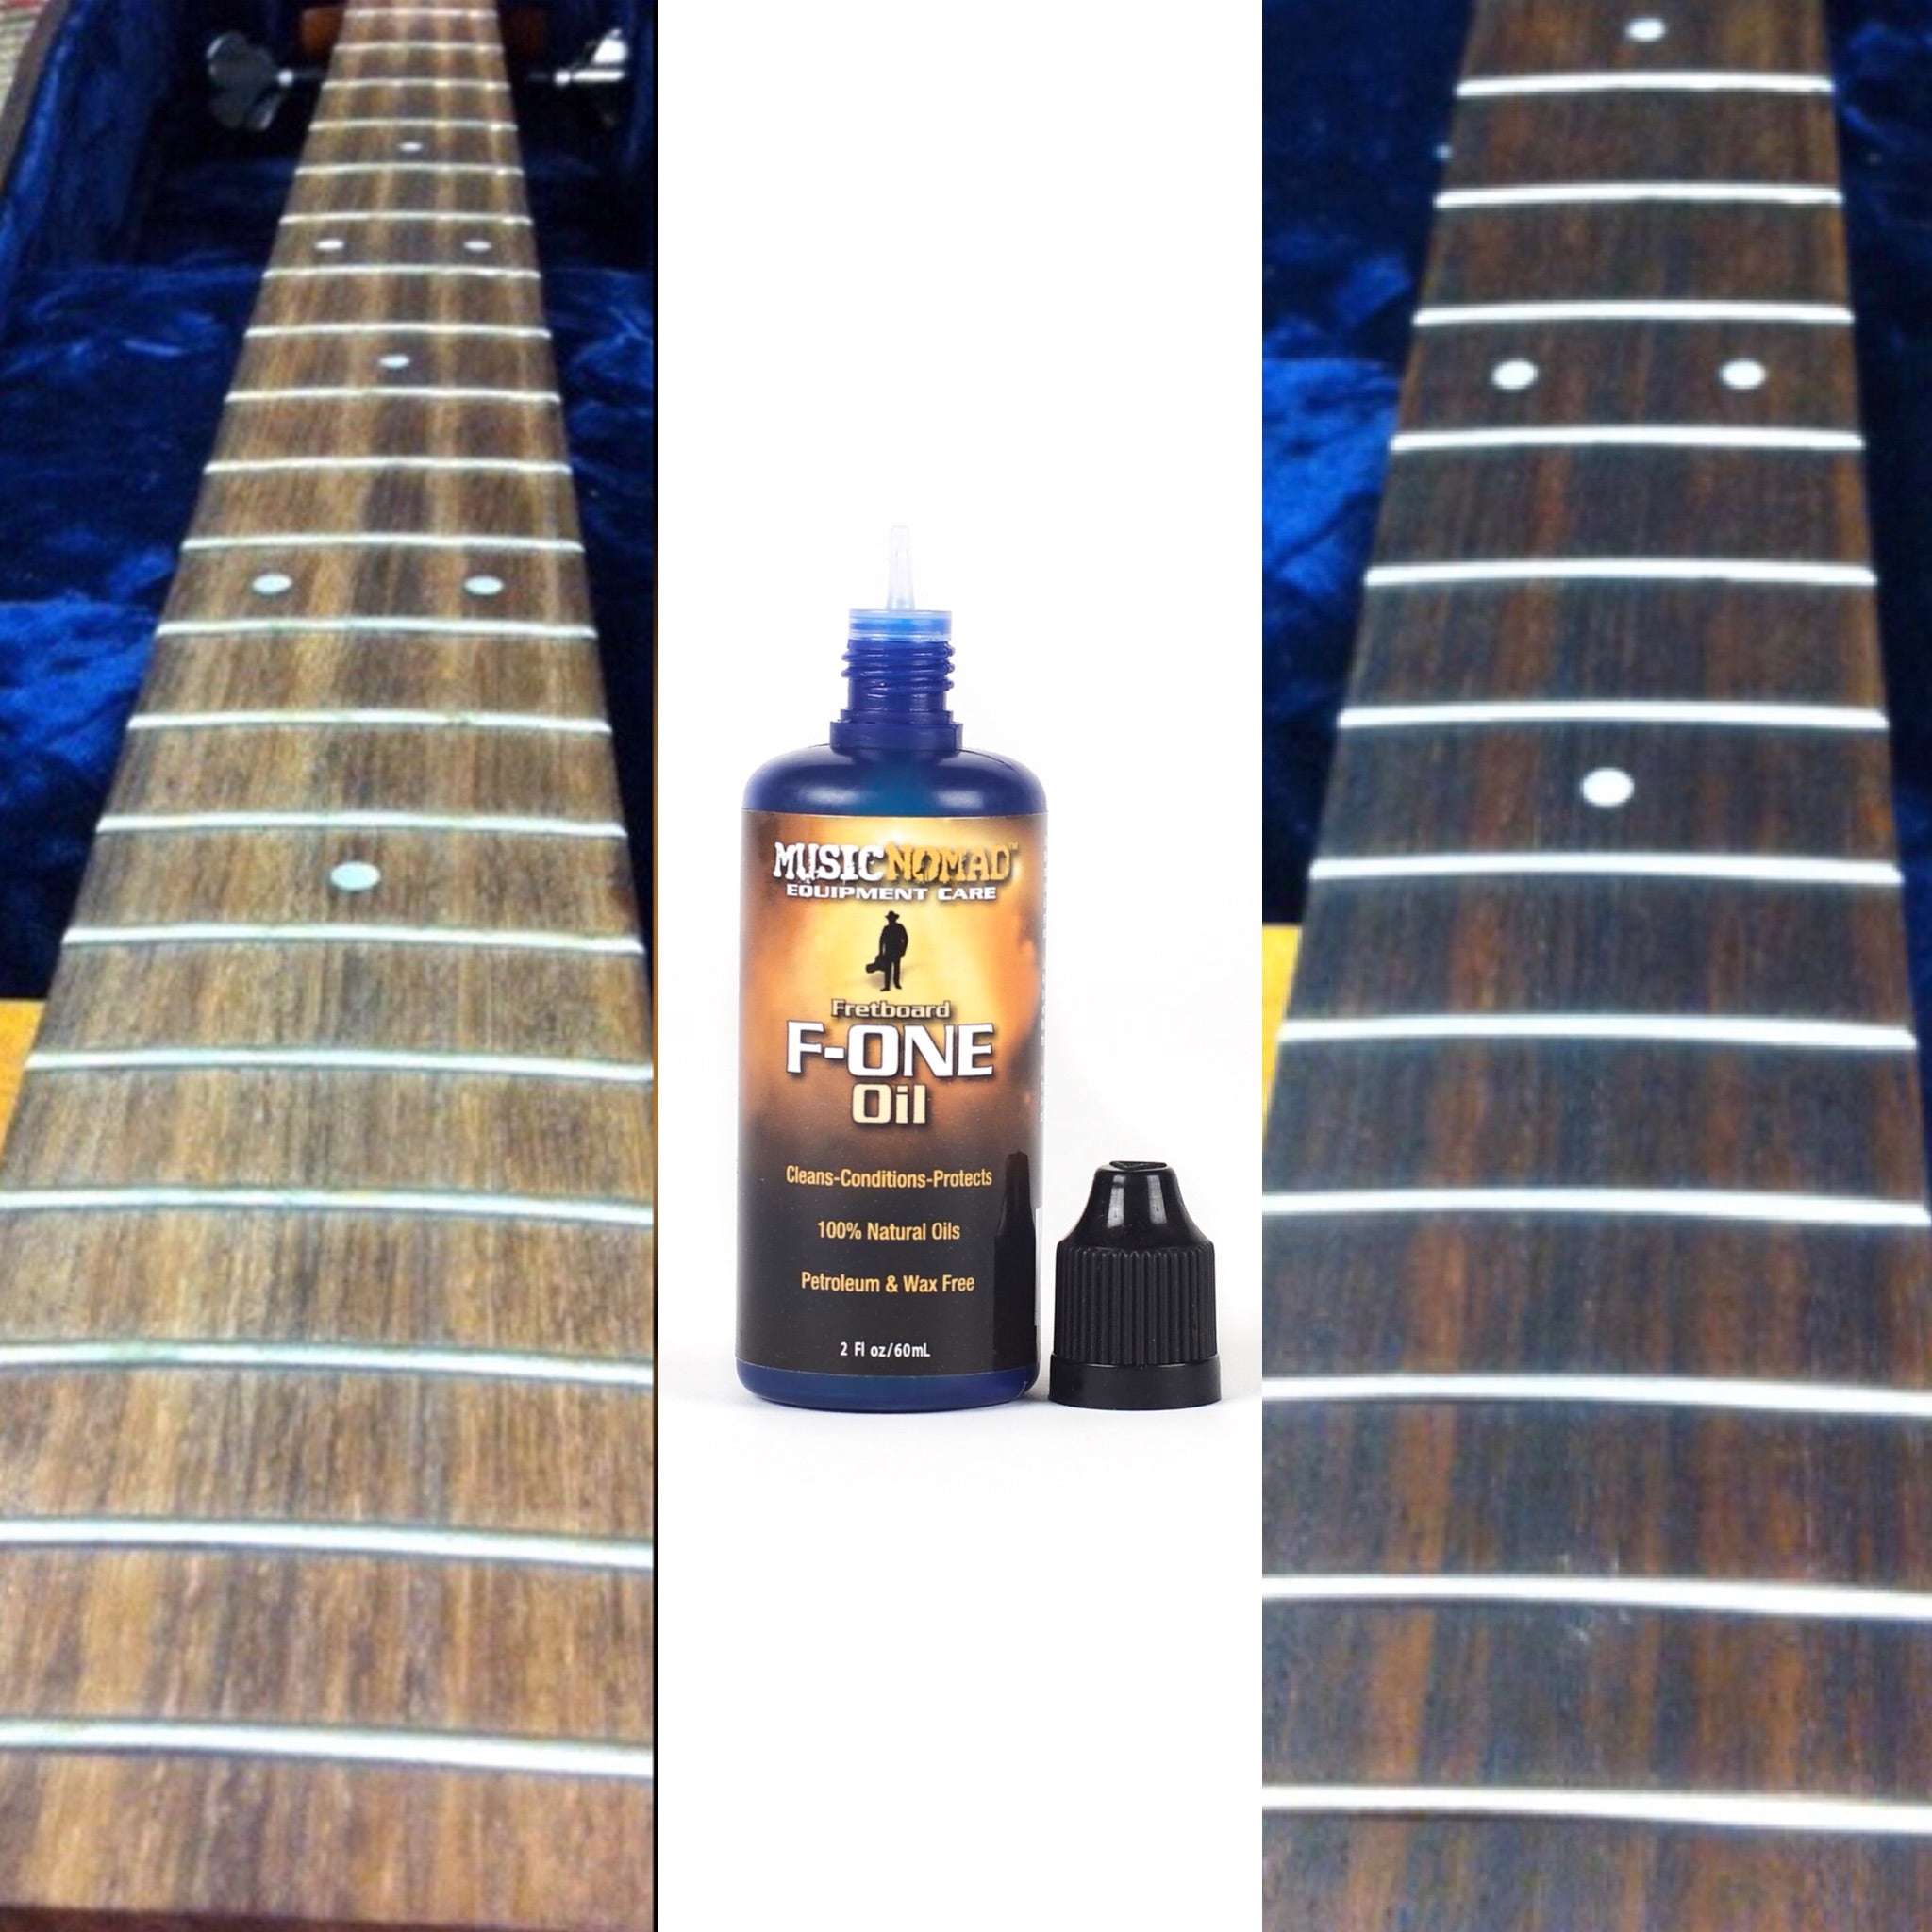 Music Nomad MN125 F-One Unfinished Fretboard Care Kit - Oil, Cloth